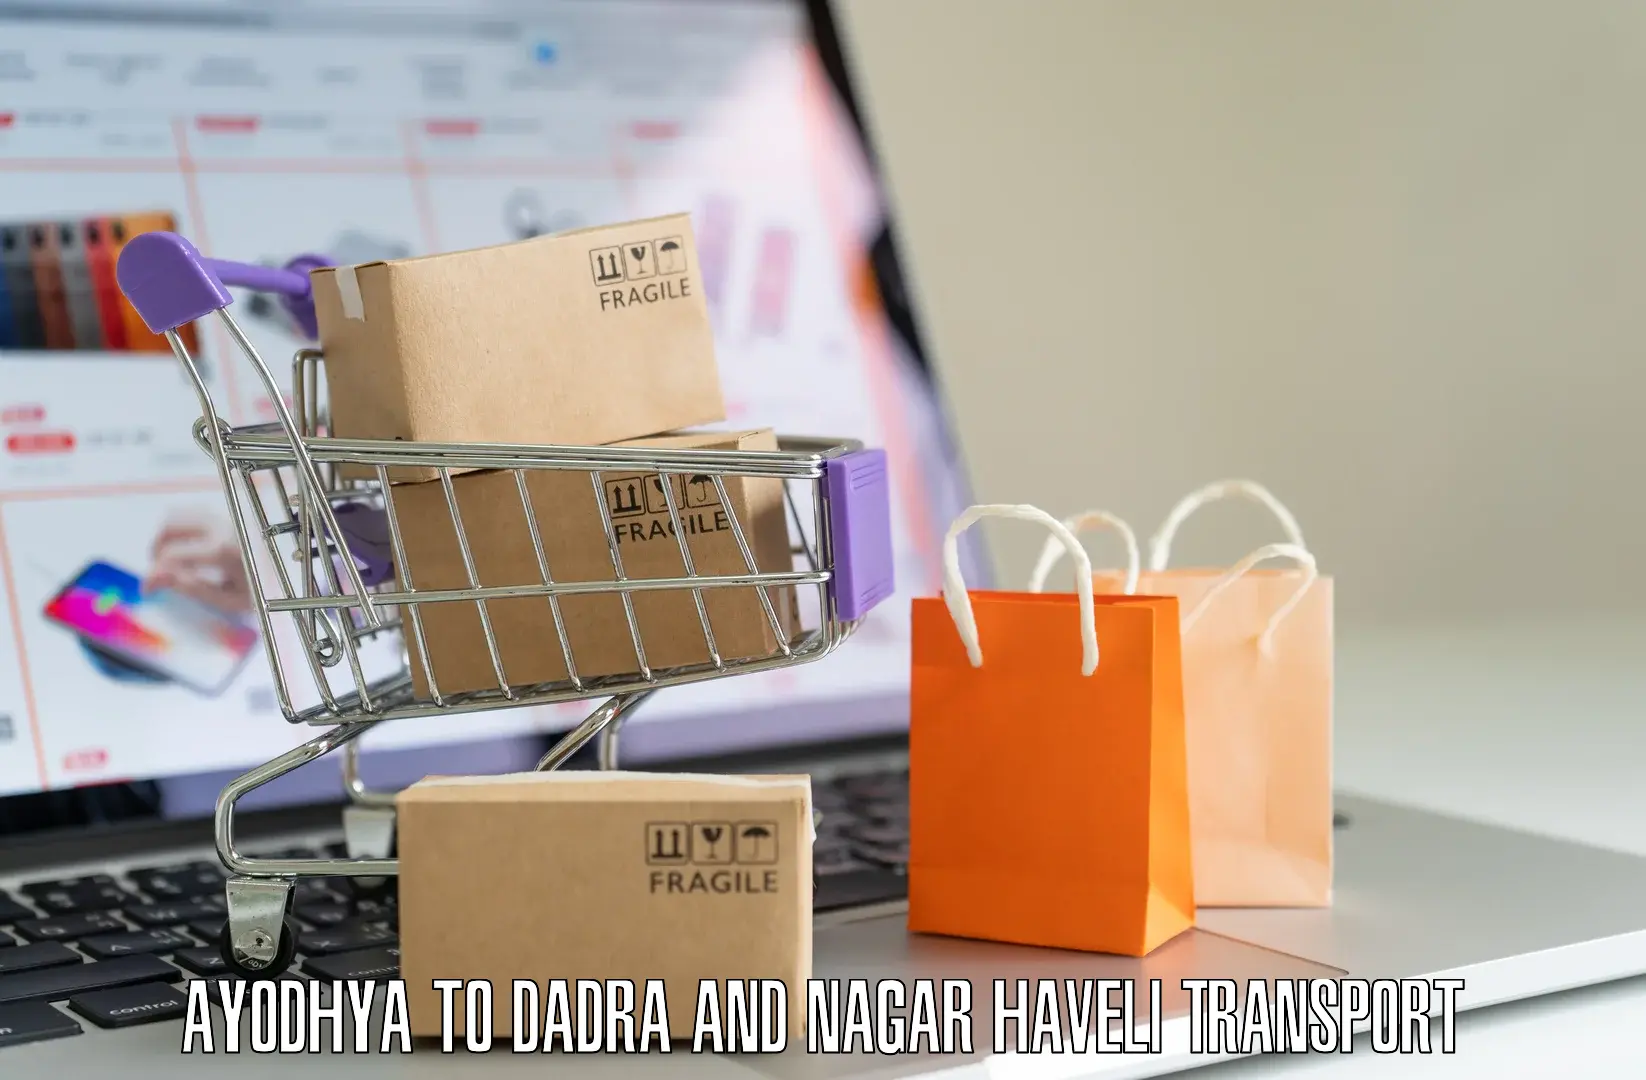 Container transport service Ayodhya to Dadra and Nagar Haveli